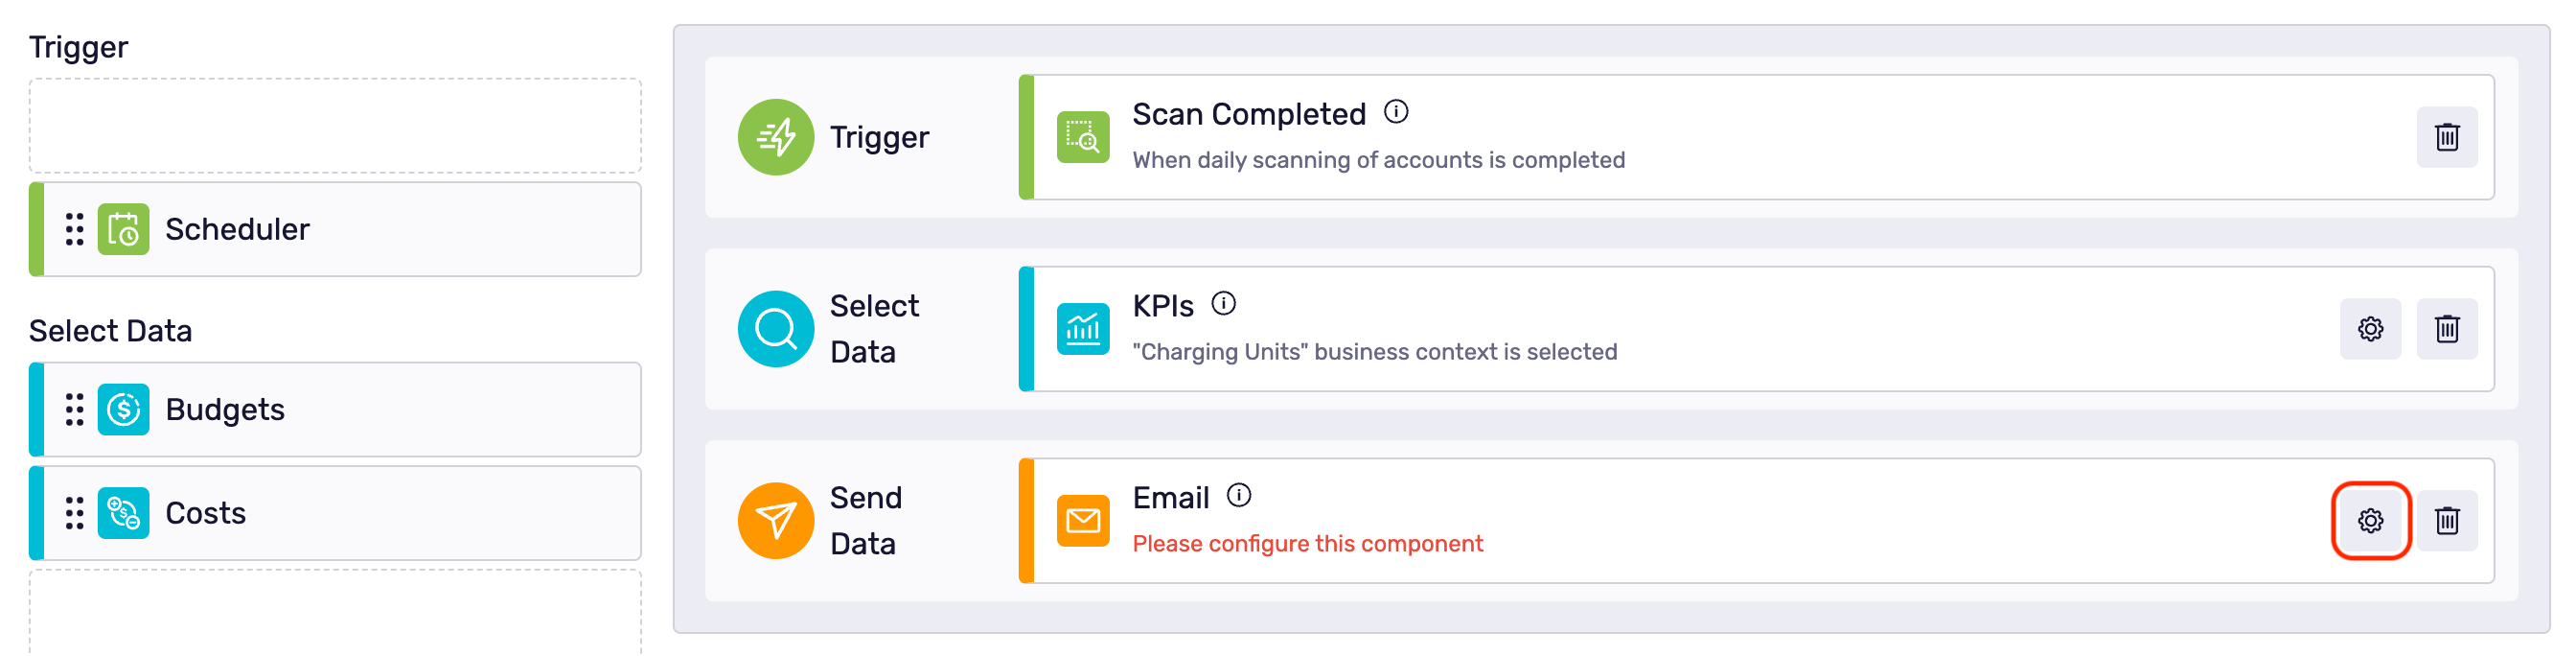 kpis-email-icon